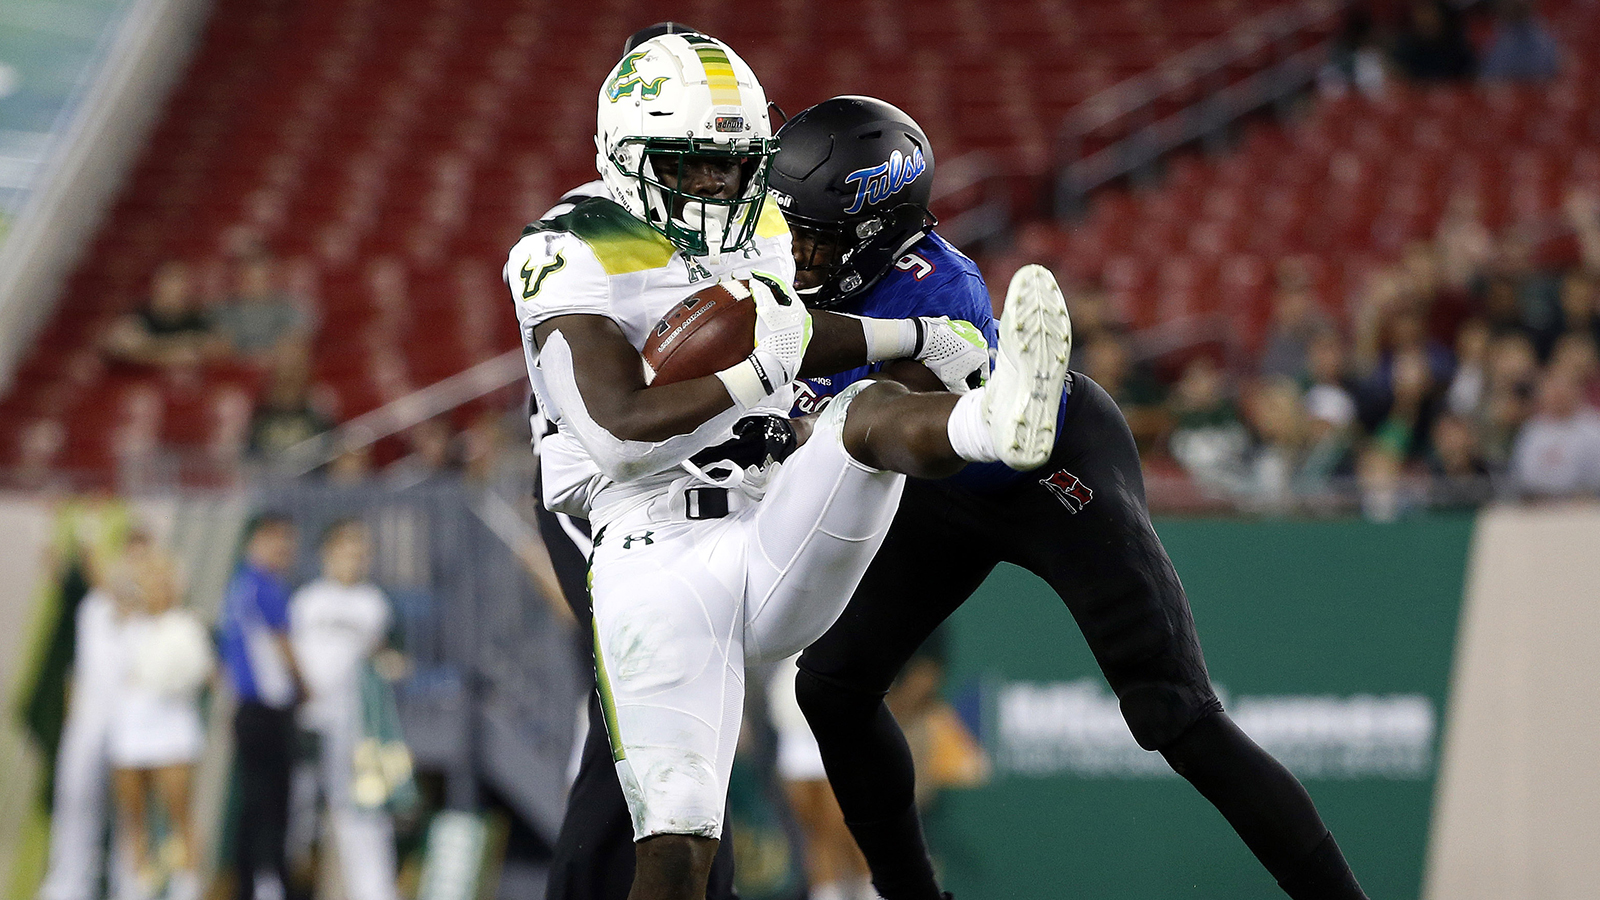 USF weathers the storm late, holds off Tulsa at home